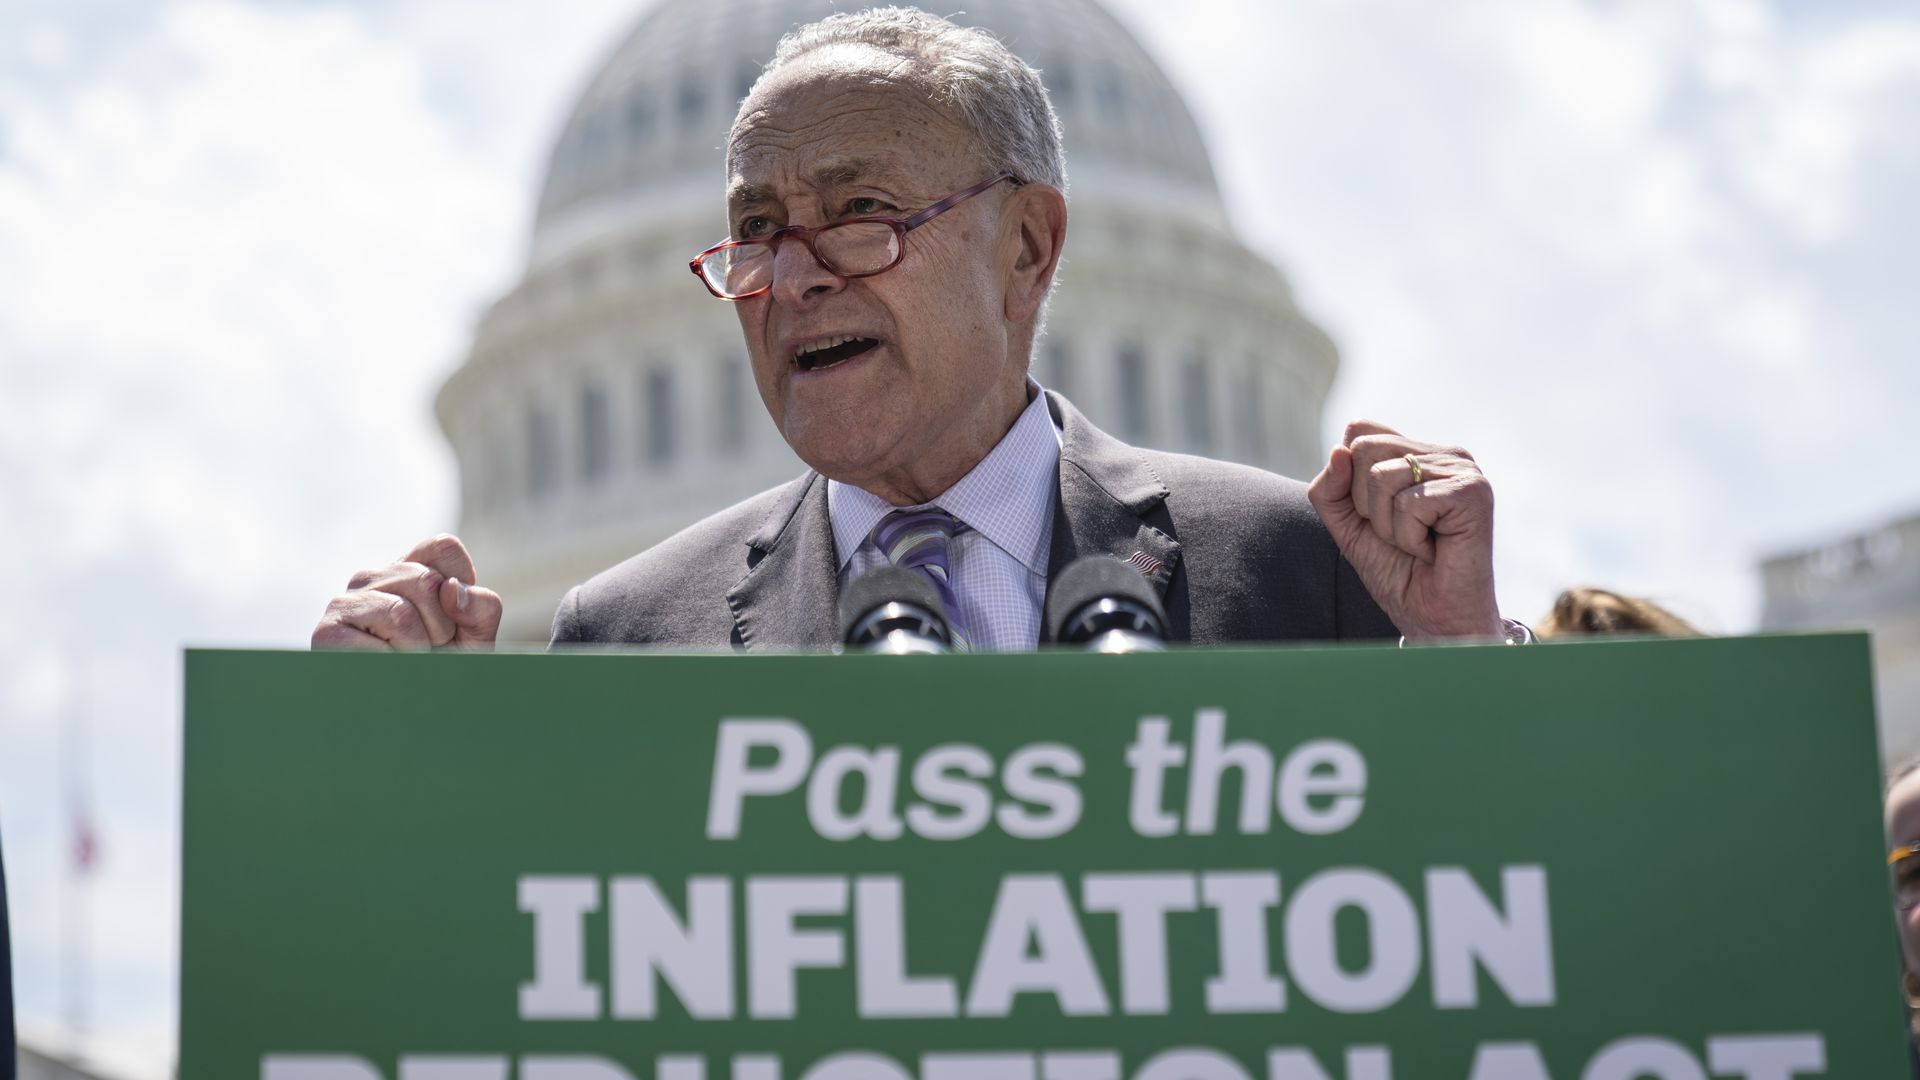  Senate Majority Leader Chuck Schumer (D-NY) speaks during a news conference about the Inflation Reduction Act 